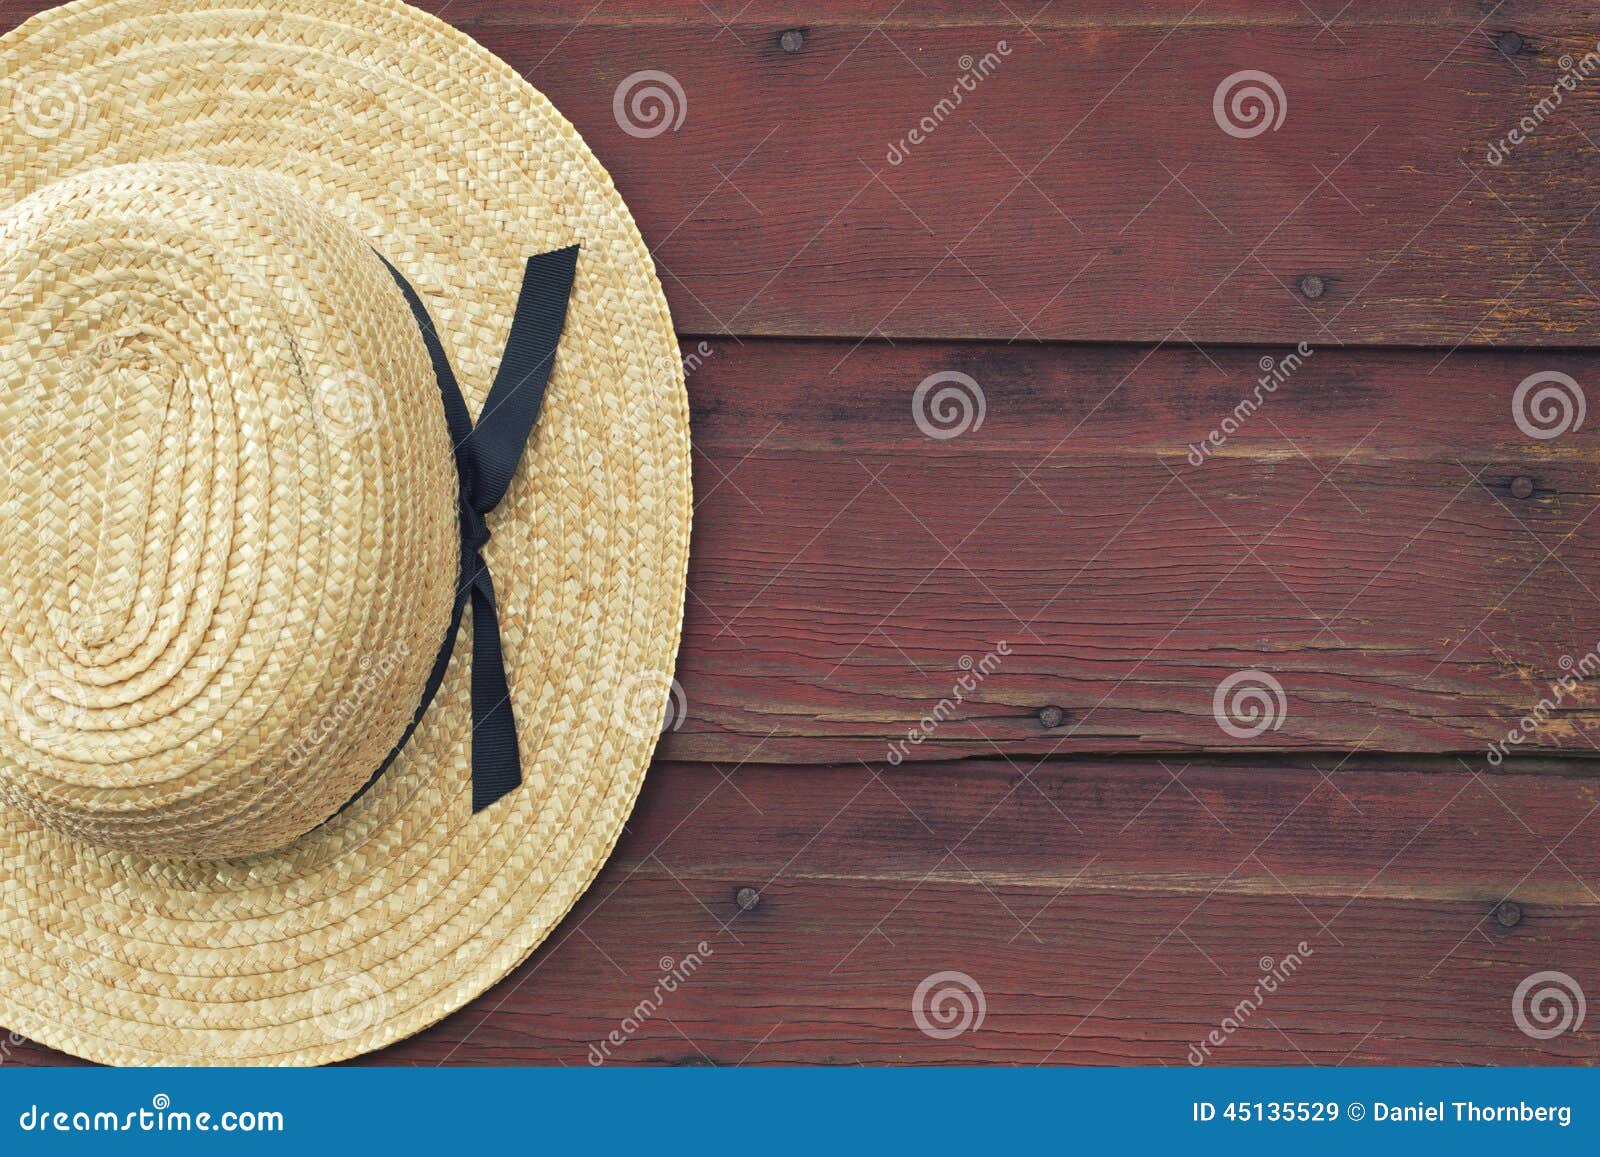 Amish Man S Straw Hat Hangs on a Red Barn Door Stock Image - Image of ...